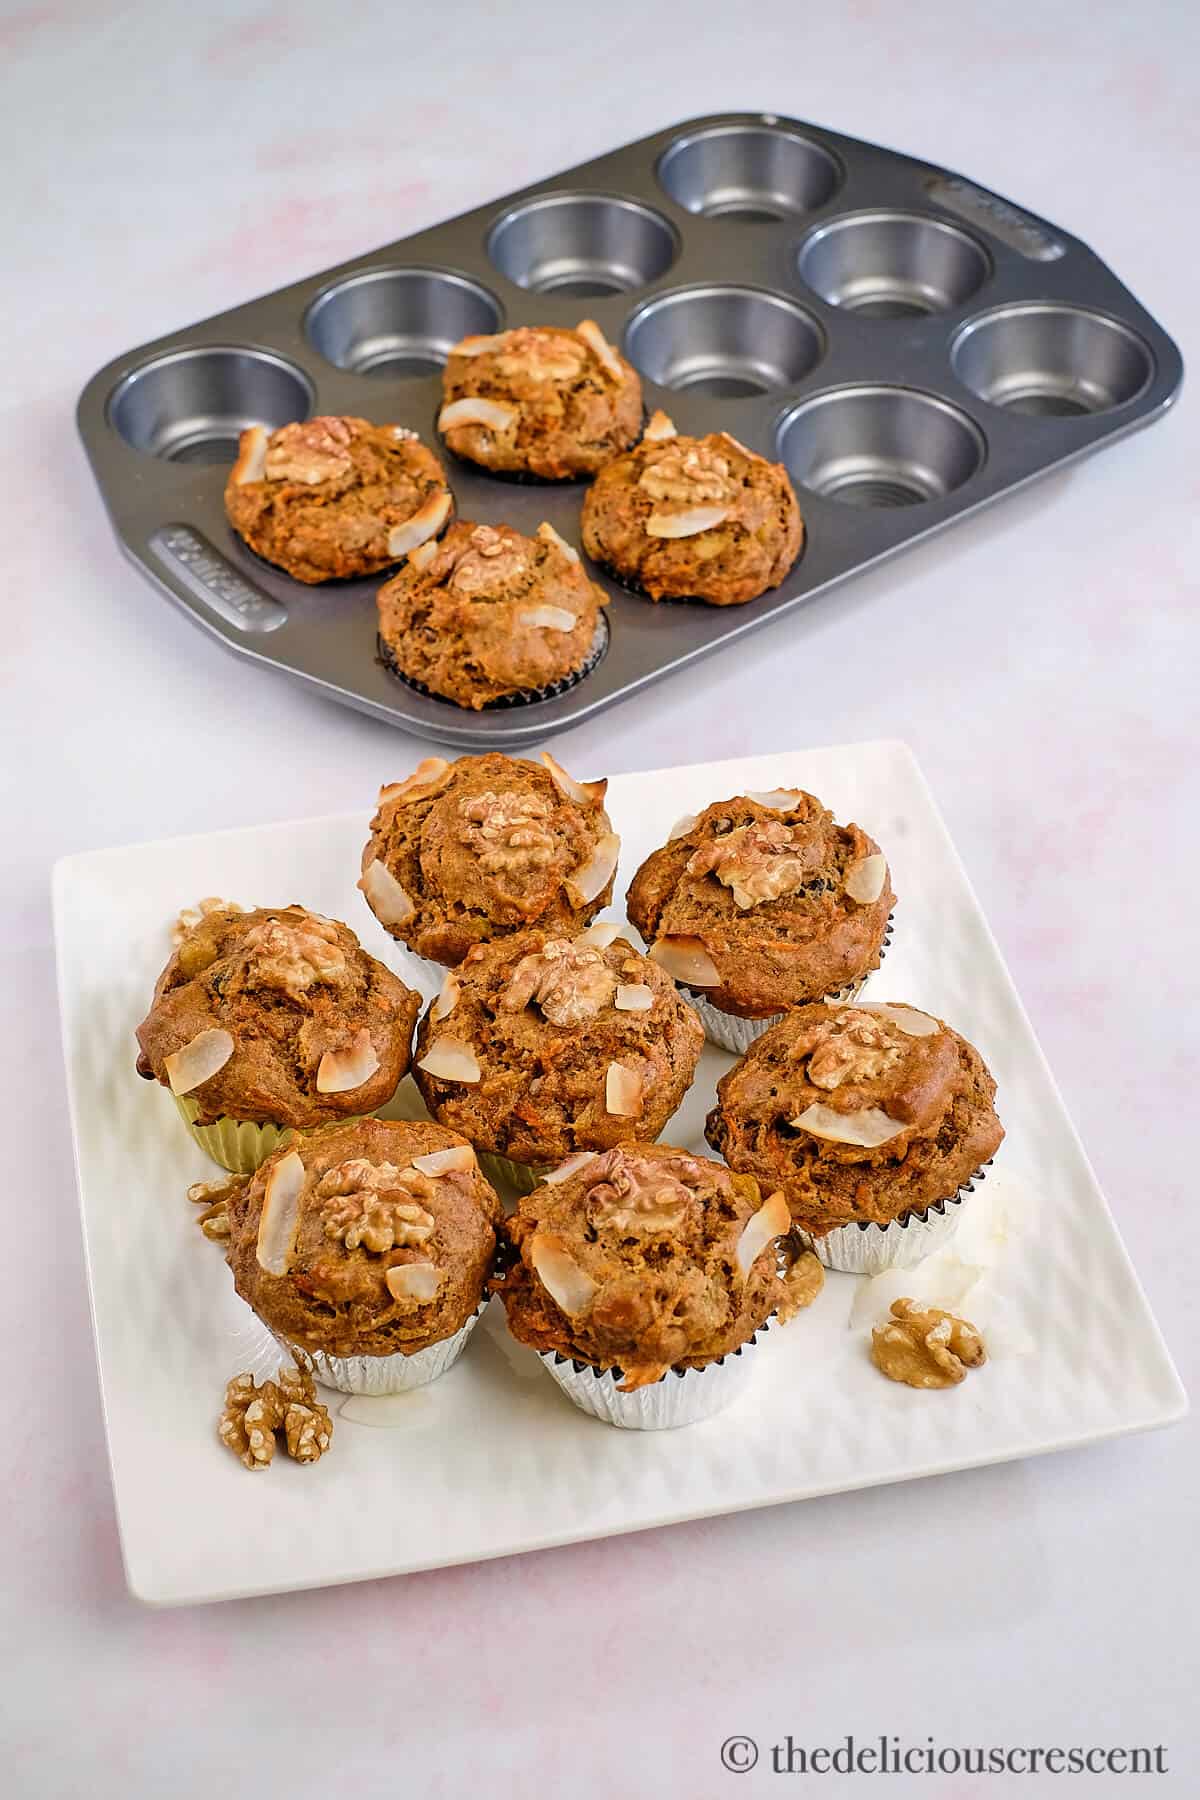 Several healthy carrot muffins placed on a white plate.